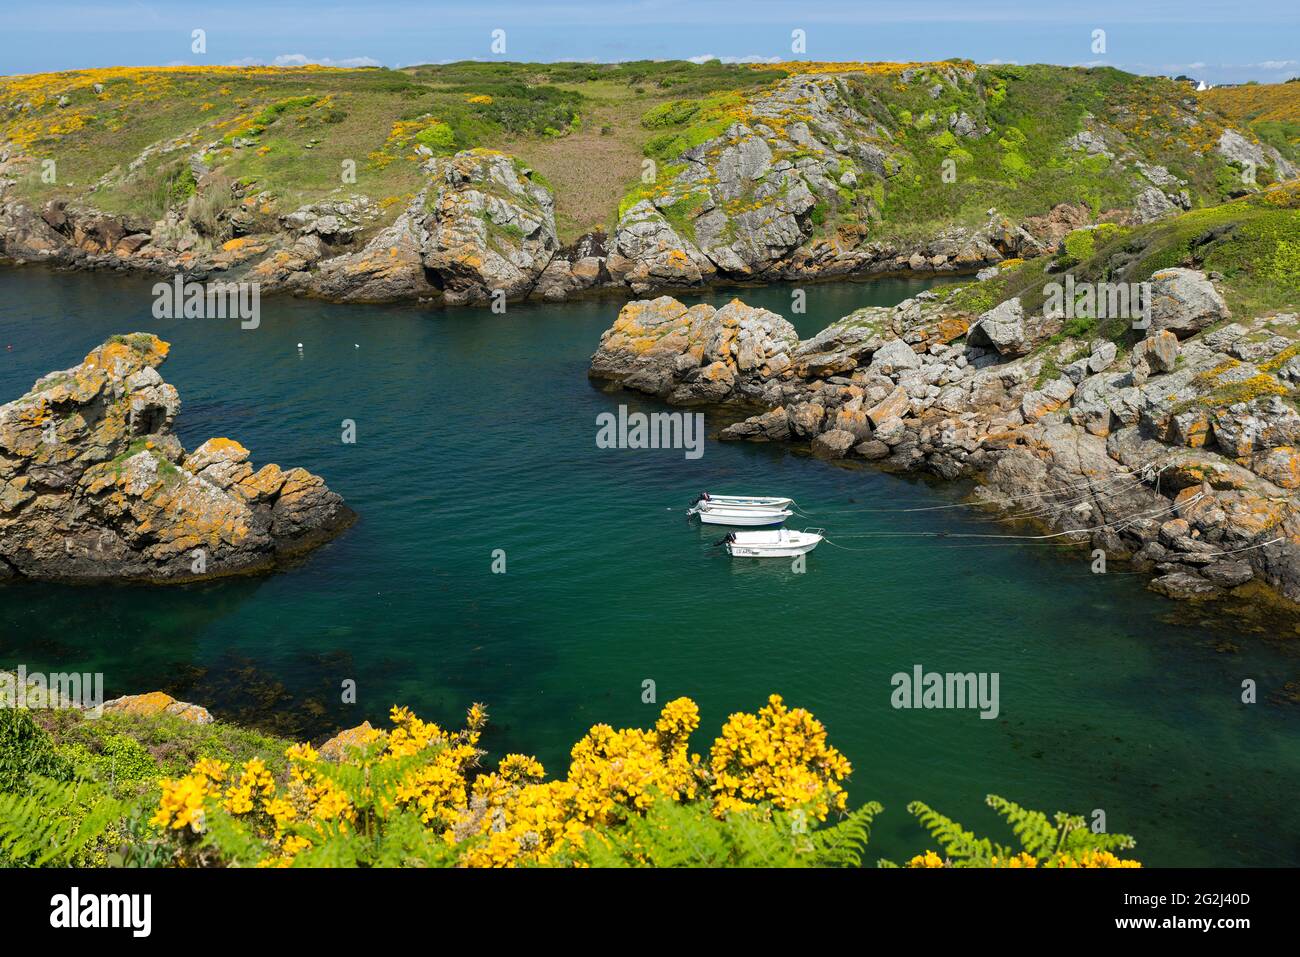 Port Saint Nicolas on the Île de Groix, boats lie in the water, gorse blooms on the slopes, France, Brittany, Morbihan department Stock Photo